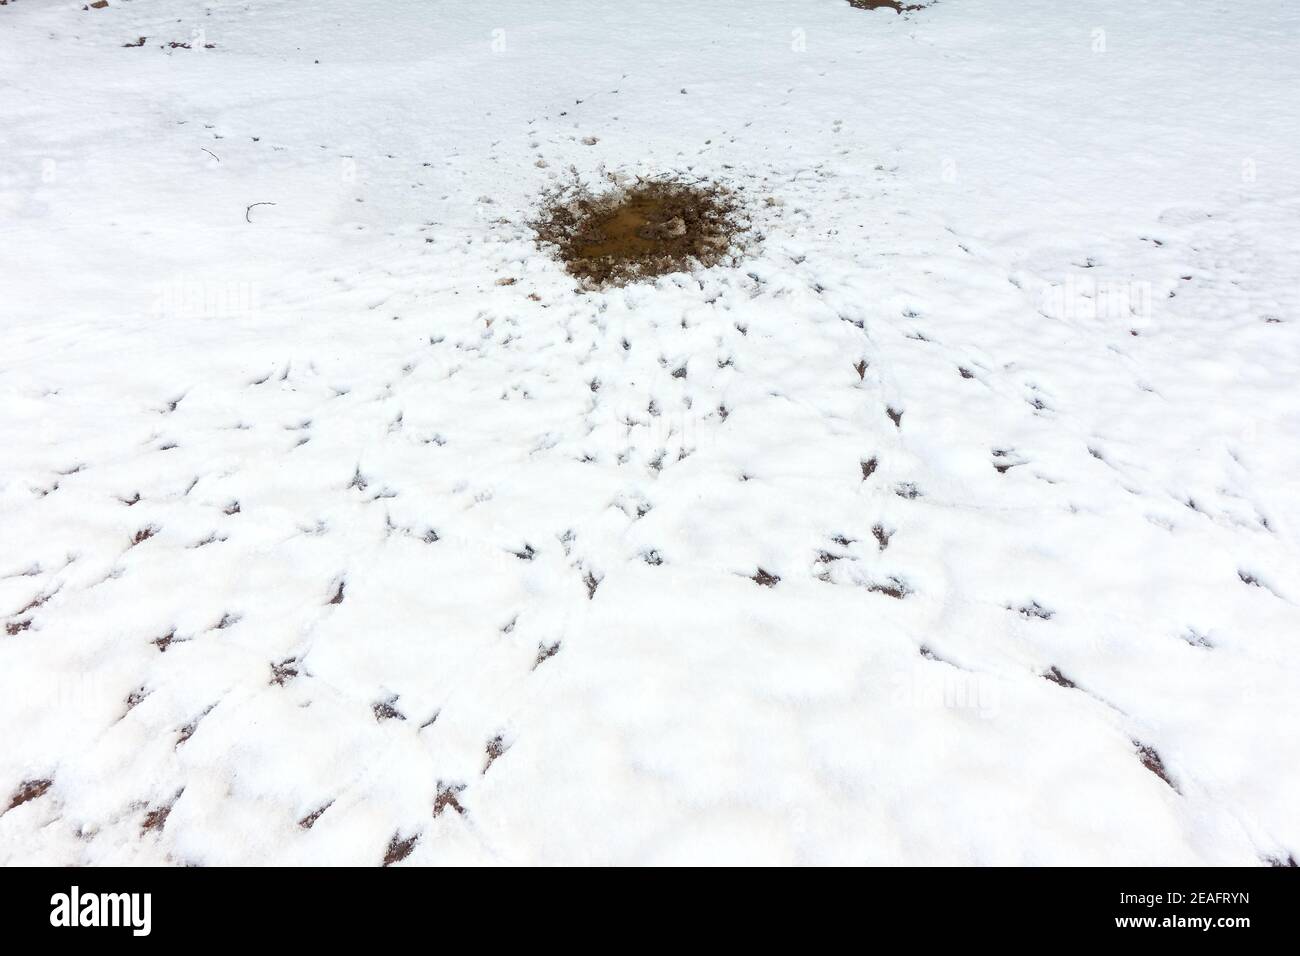 Signs of birds feeding and drinking around a melted patch of snow as evidenced by footprints and tracks in the wintery conditions Stock Photo